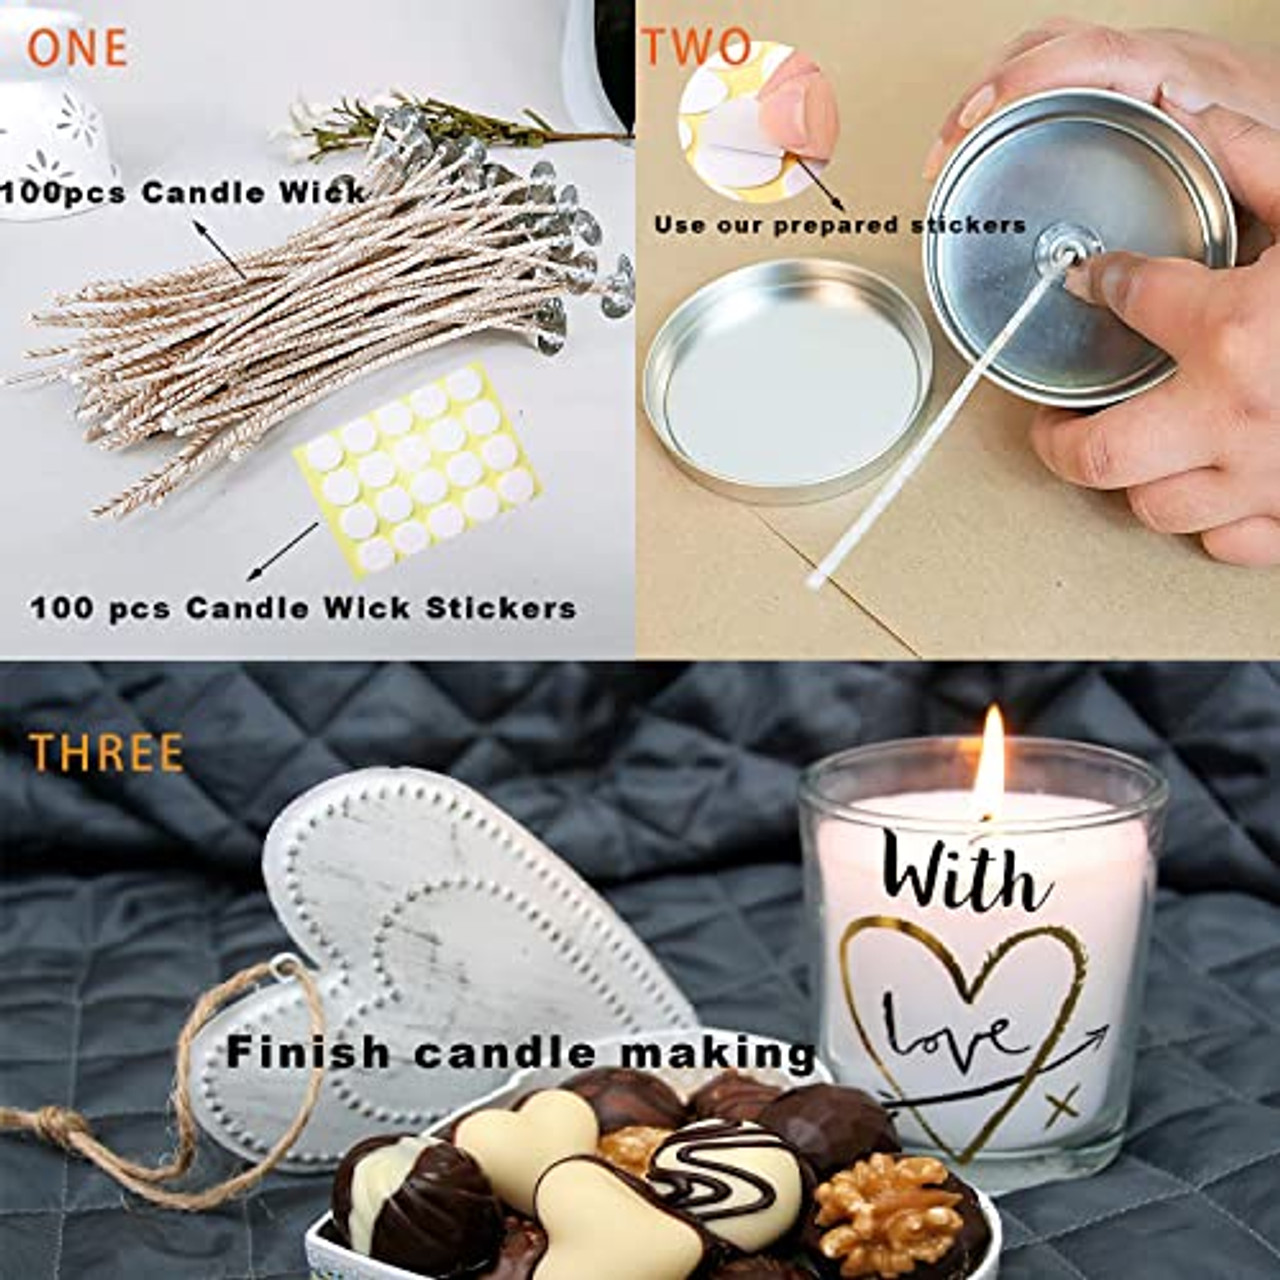 DINGPAI 100pcs Cotton Candle Wicks, 6 inches Low Smoke Pre-Waxed Candle  Wicks for Candle Making, Candle DIY